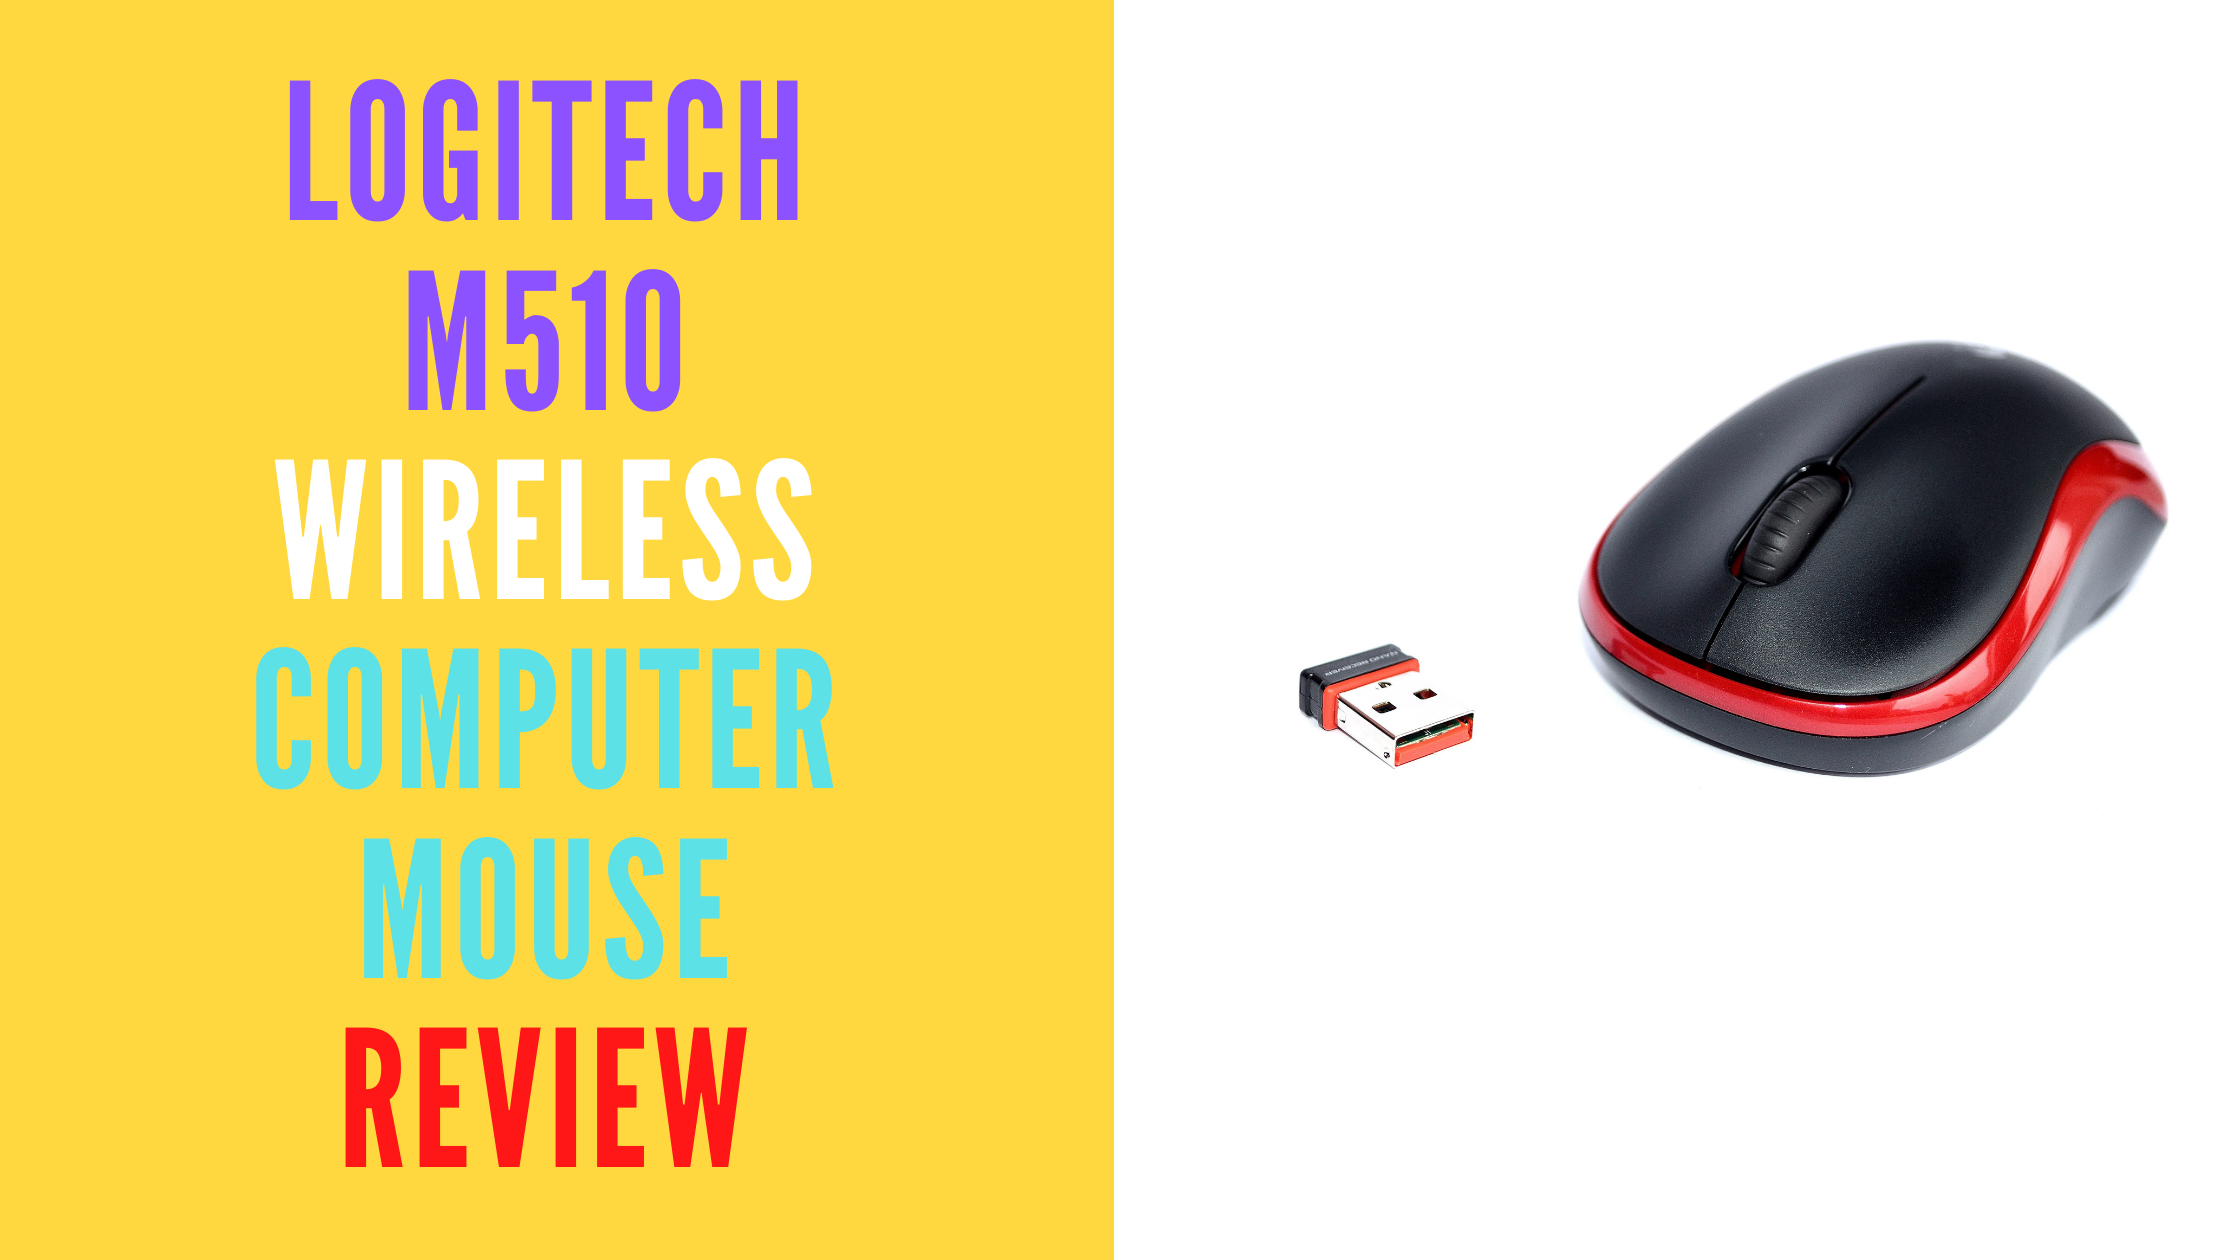 Logitech M510 Wireless Computer Mouse Review